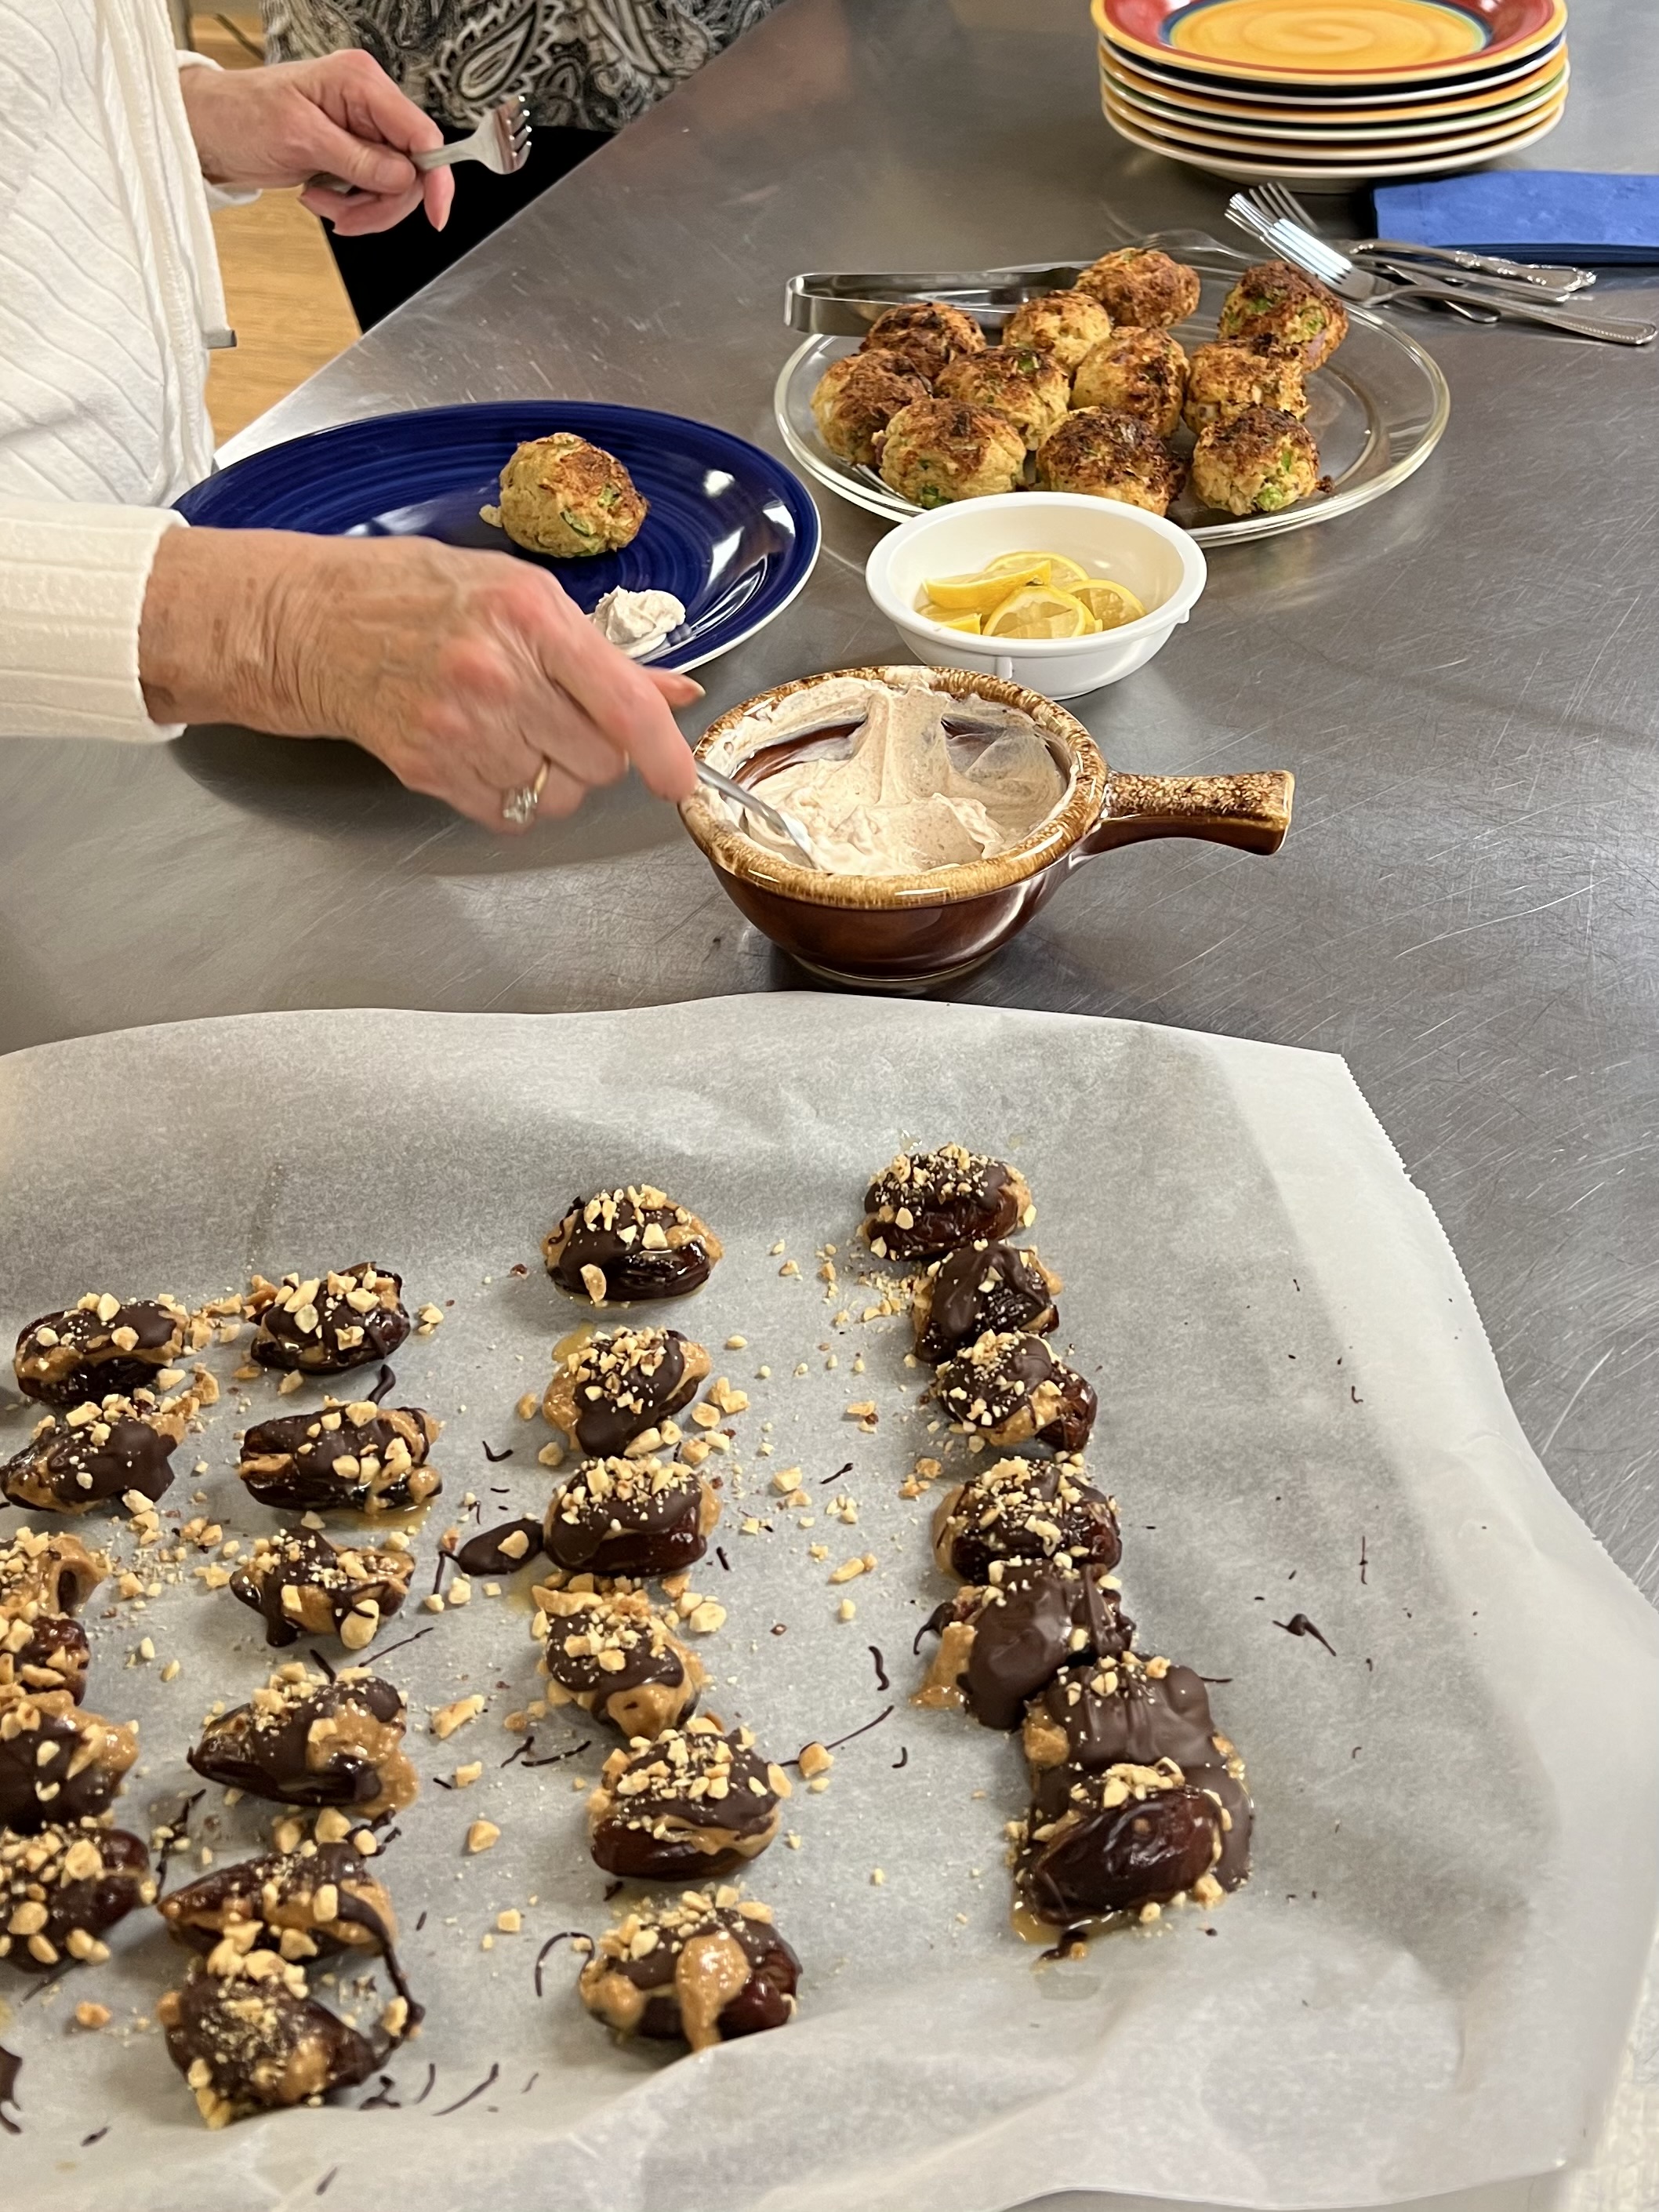 Cooking for weight loss class recipes including cooking for weight loss- air fryer fish croquets with a yogurt and cayenne tarter sauce and peanut butter and chocolate stuffed dates.